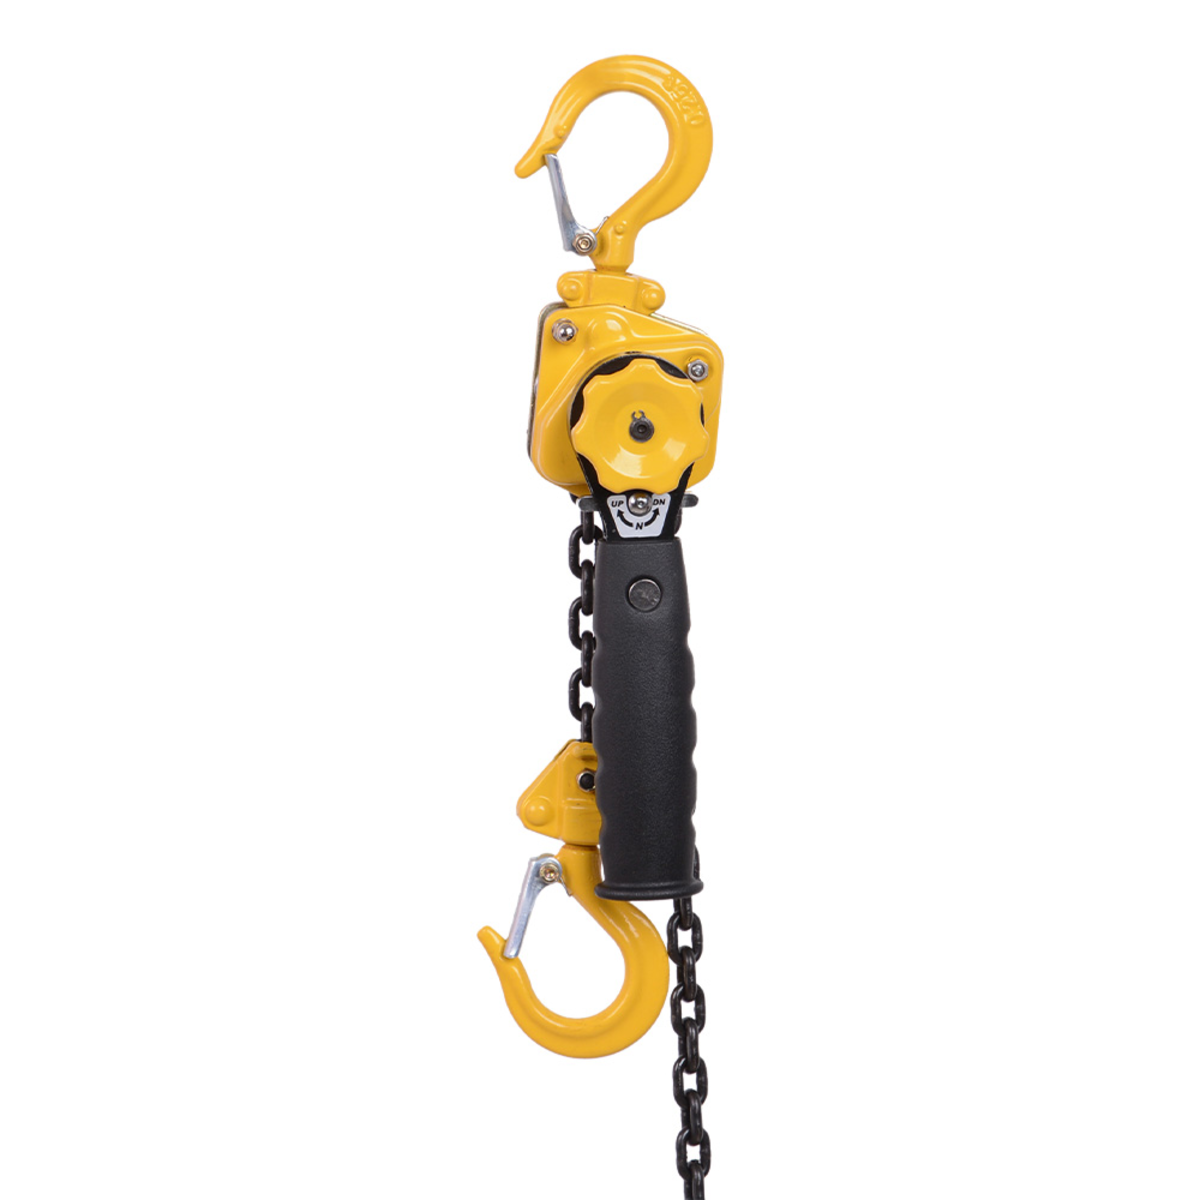 1 Ton lever Hoist with 15 ft. Chain Fall